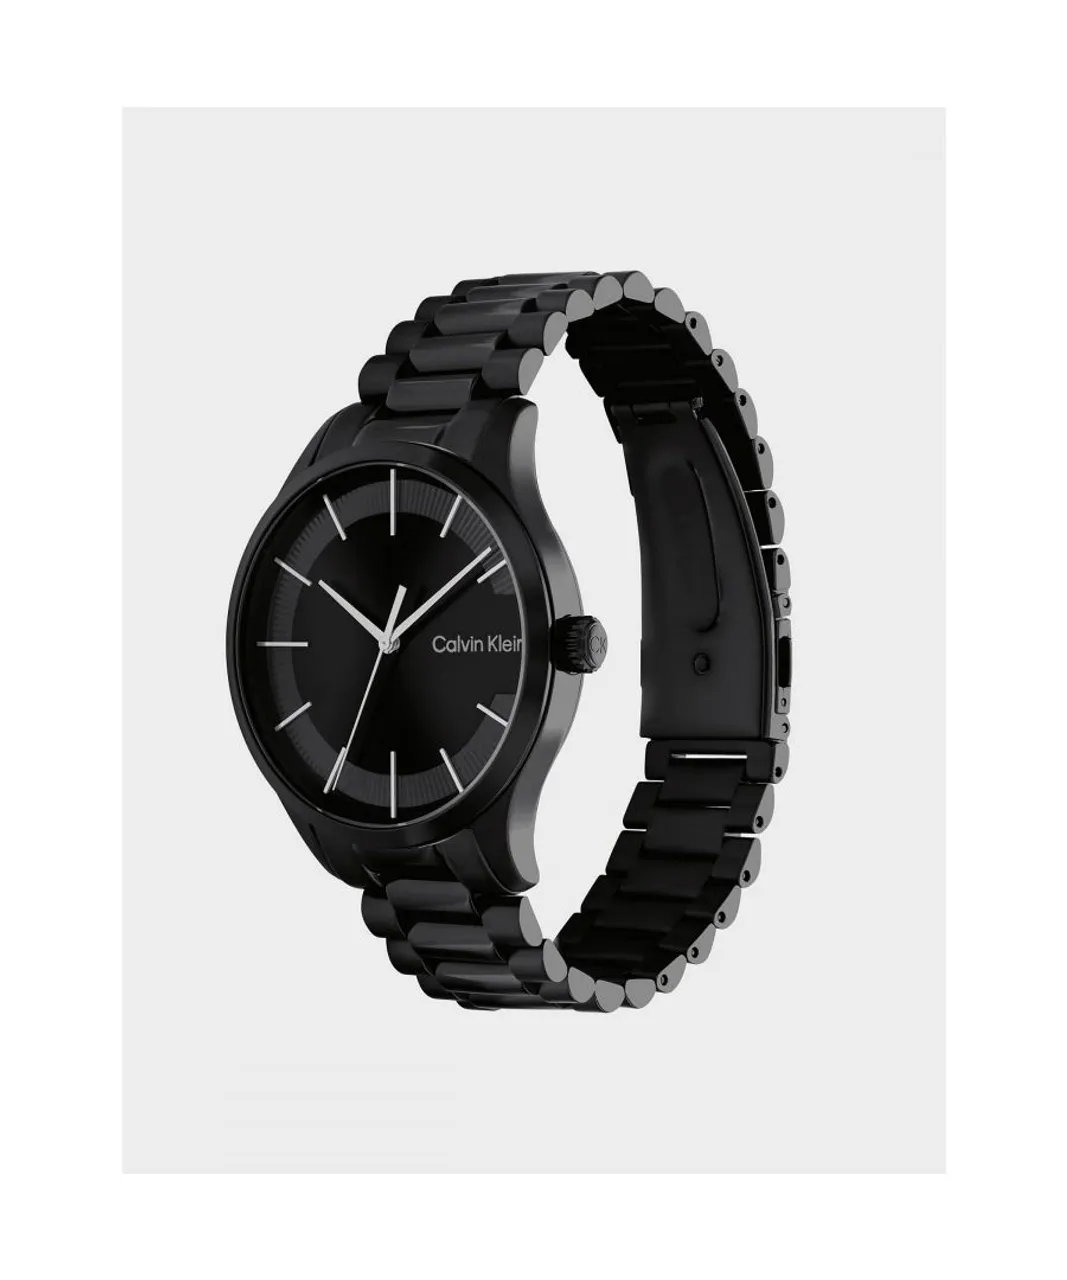 Calvin Klein Mens Accessories Iconic Bracelet Watch in Black Stainless Steel - One Size